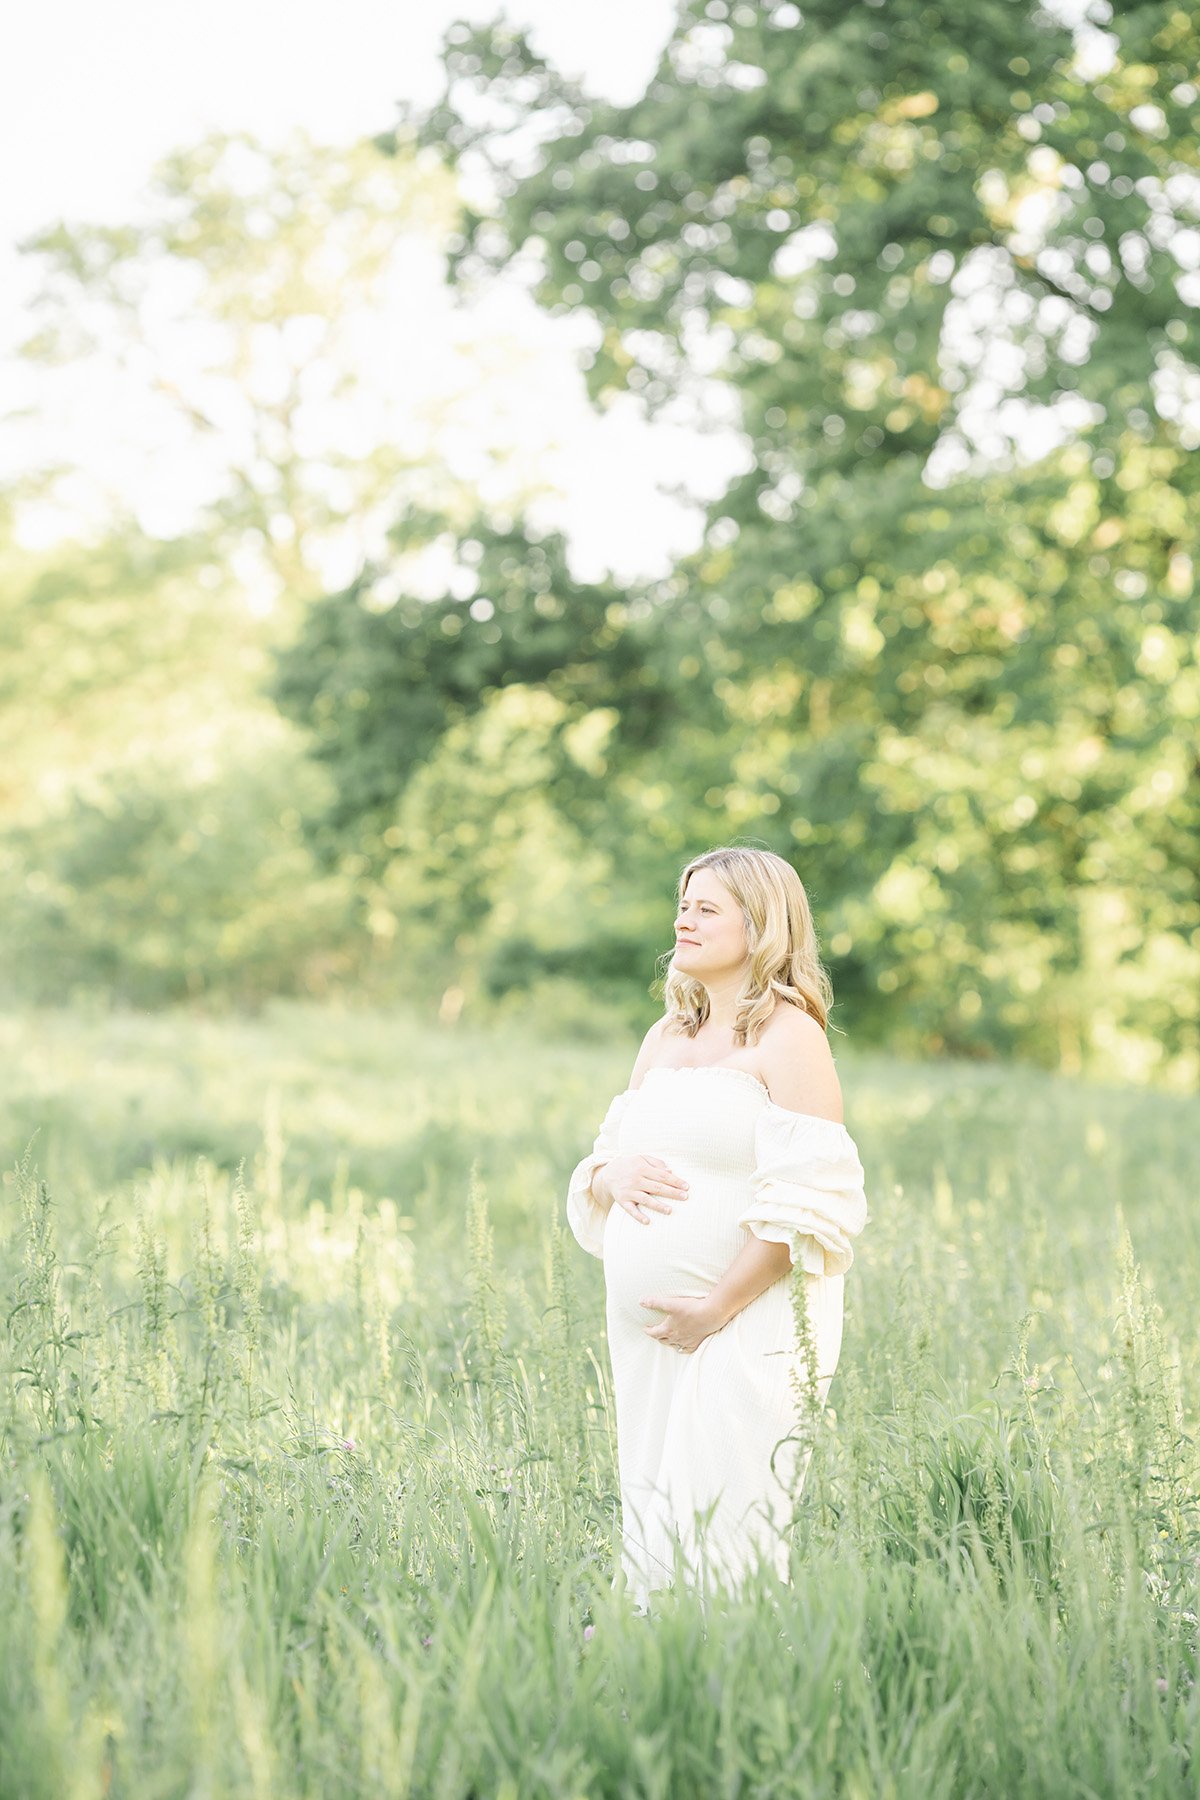 Bright and airy romantic pregnancy photoshoot in Louisville Ky with Julie Brock Photography